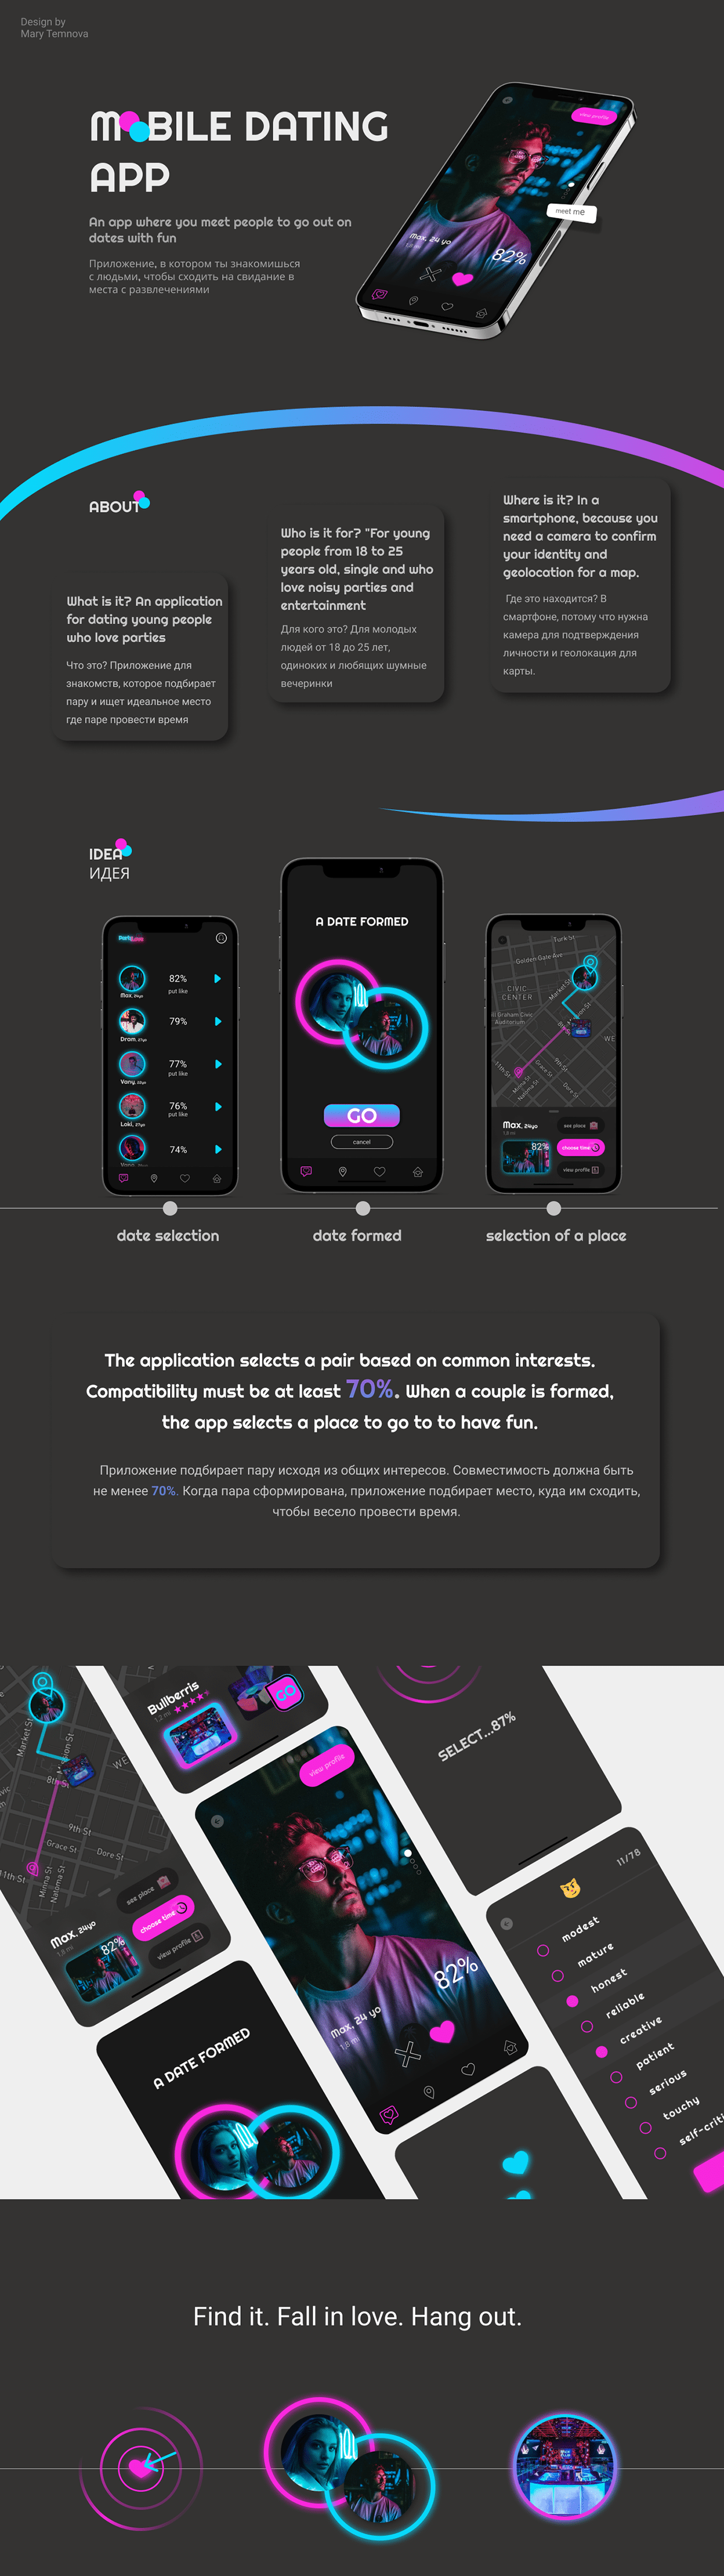 PartyLove - dating app template